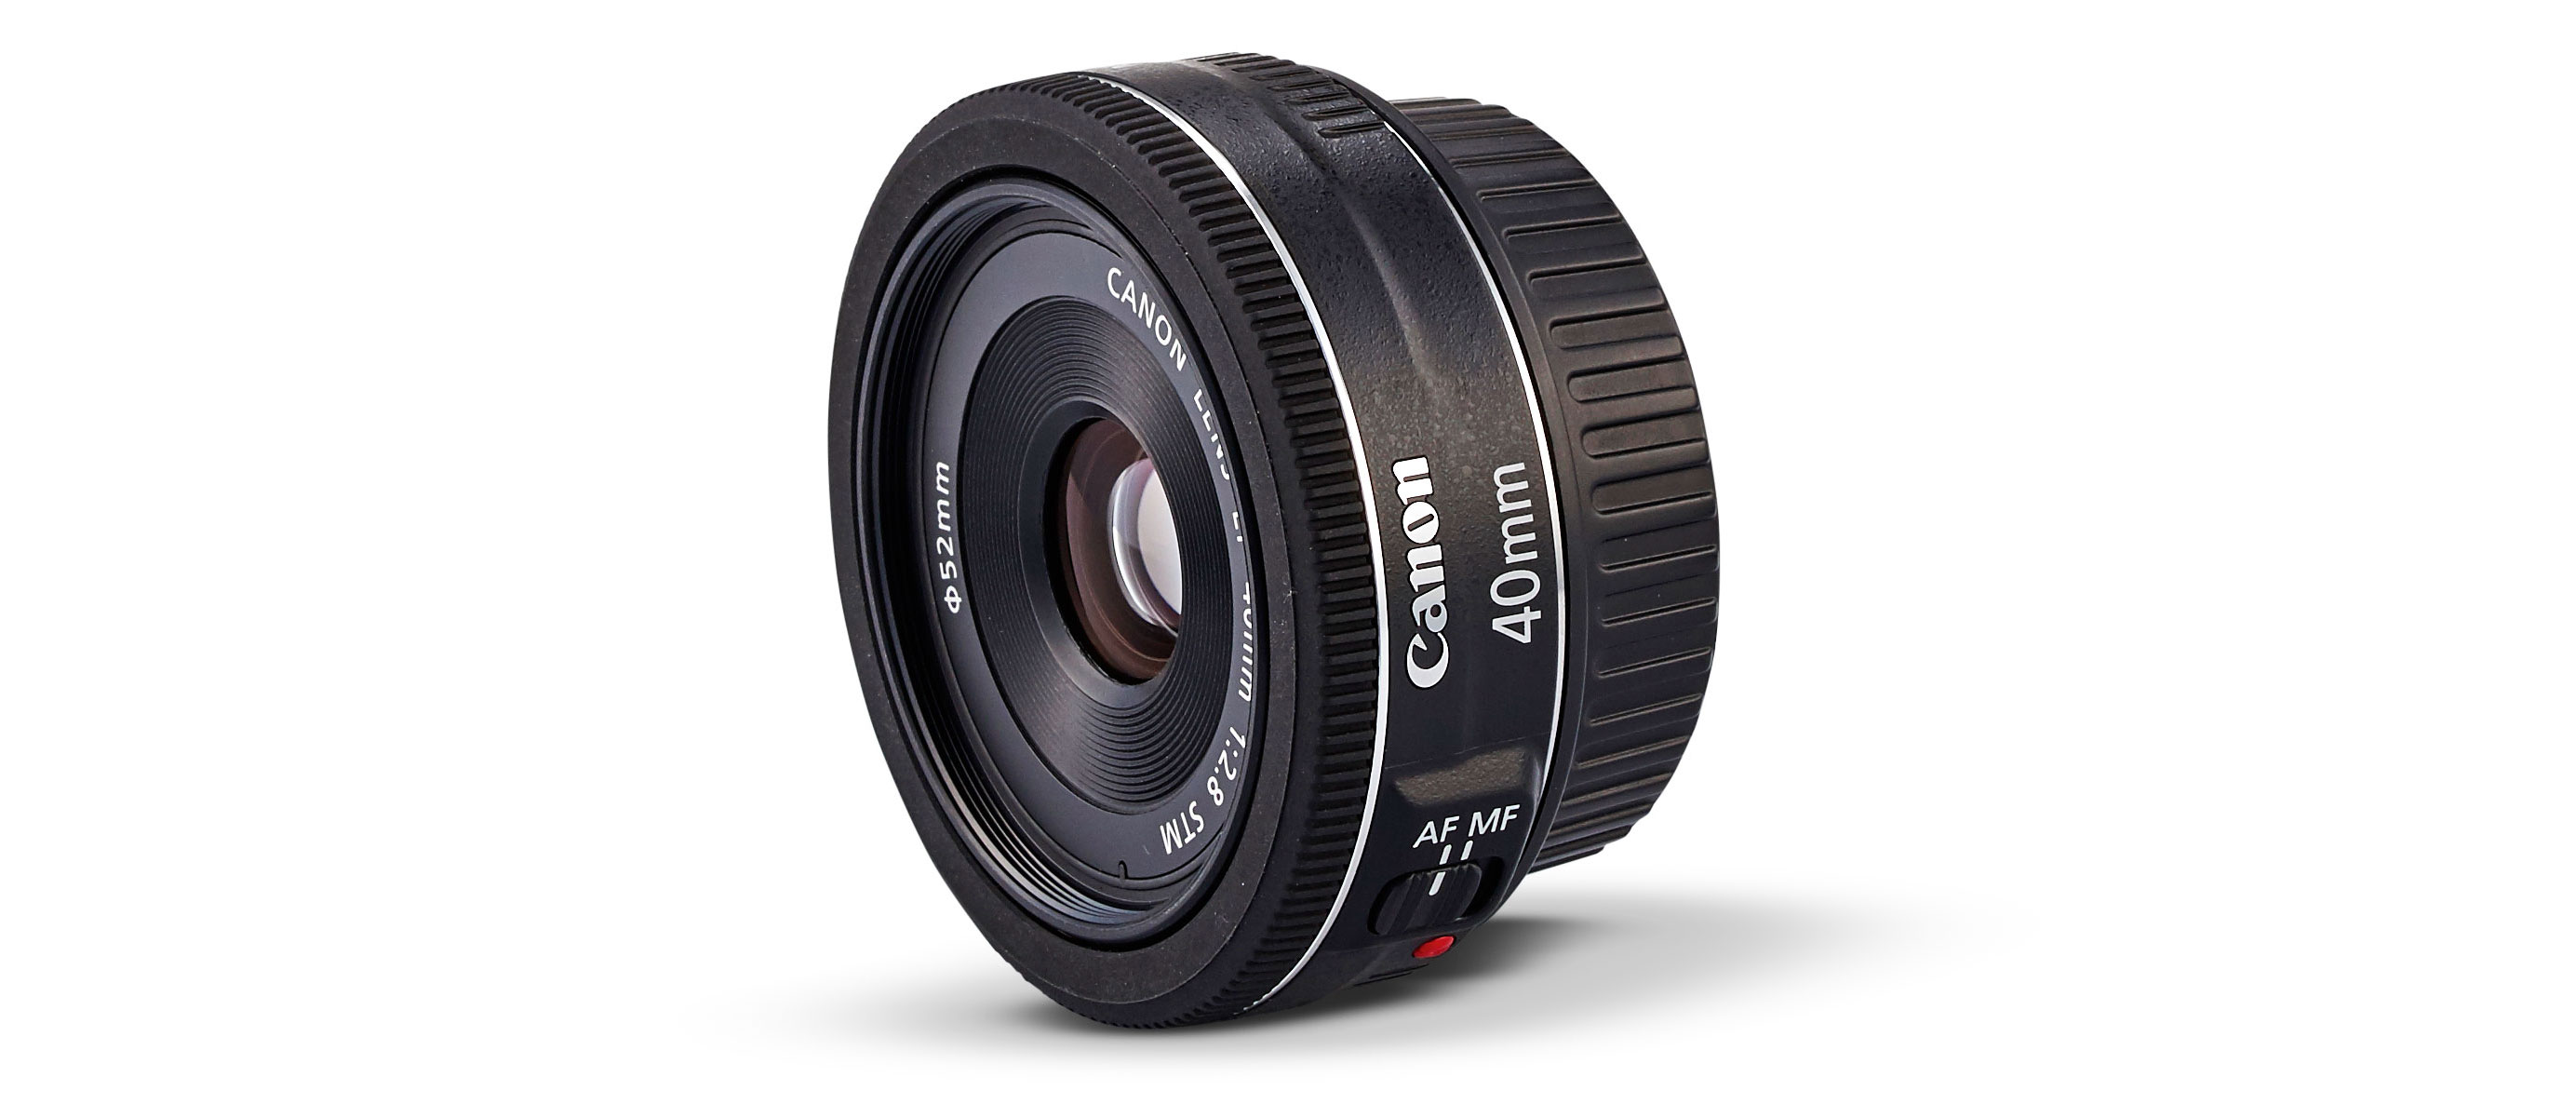 Объективы 40mm. Canon EF 40mm f/2.8 STM. Canon EF-S 24mm f/2.8 STM. Canon EF-S 24mm 2.8 STM. Canon EF 24mm STM.